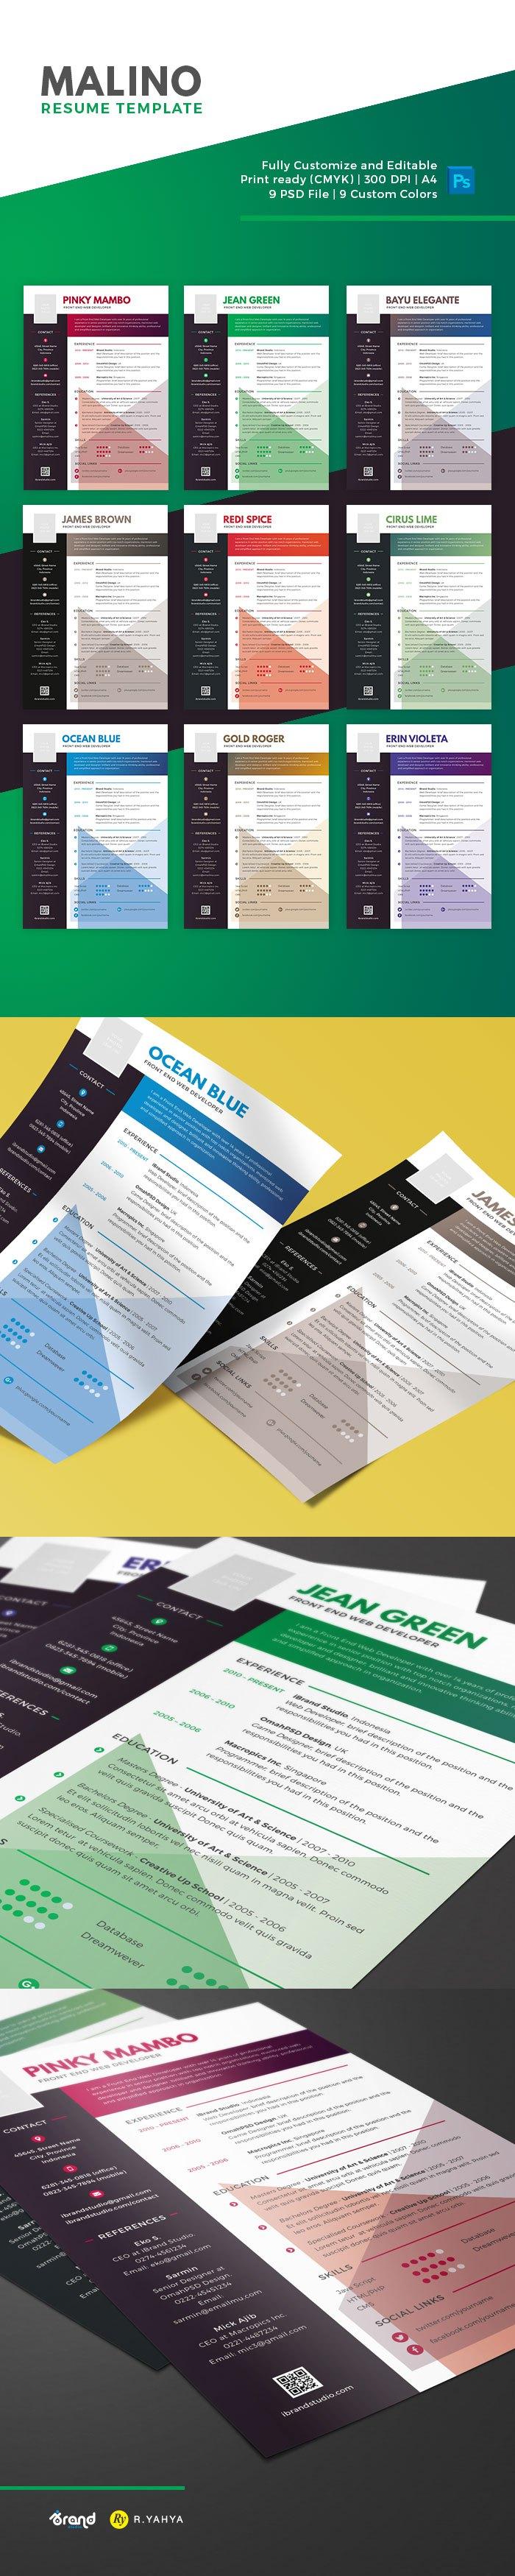 photoshop resume templates free resume template in awesome